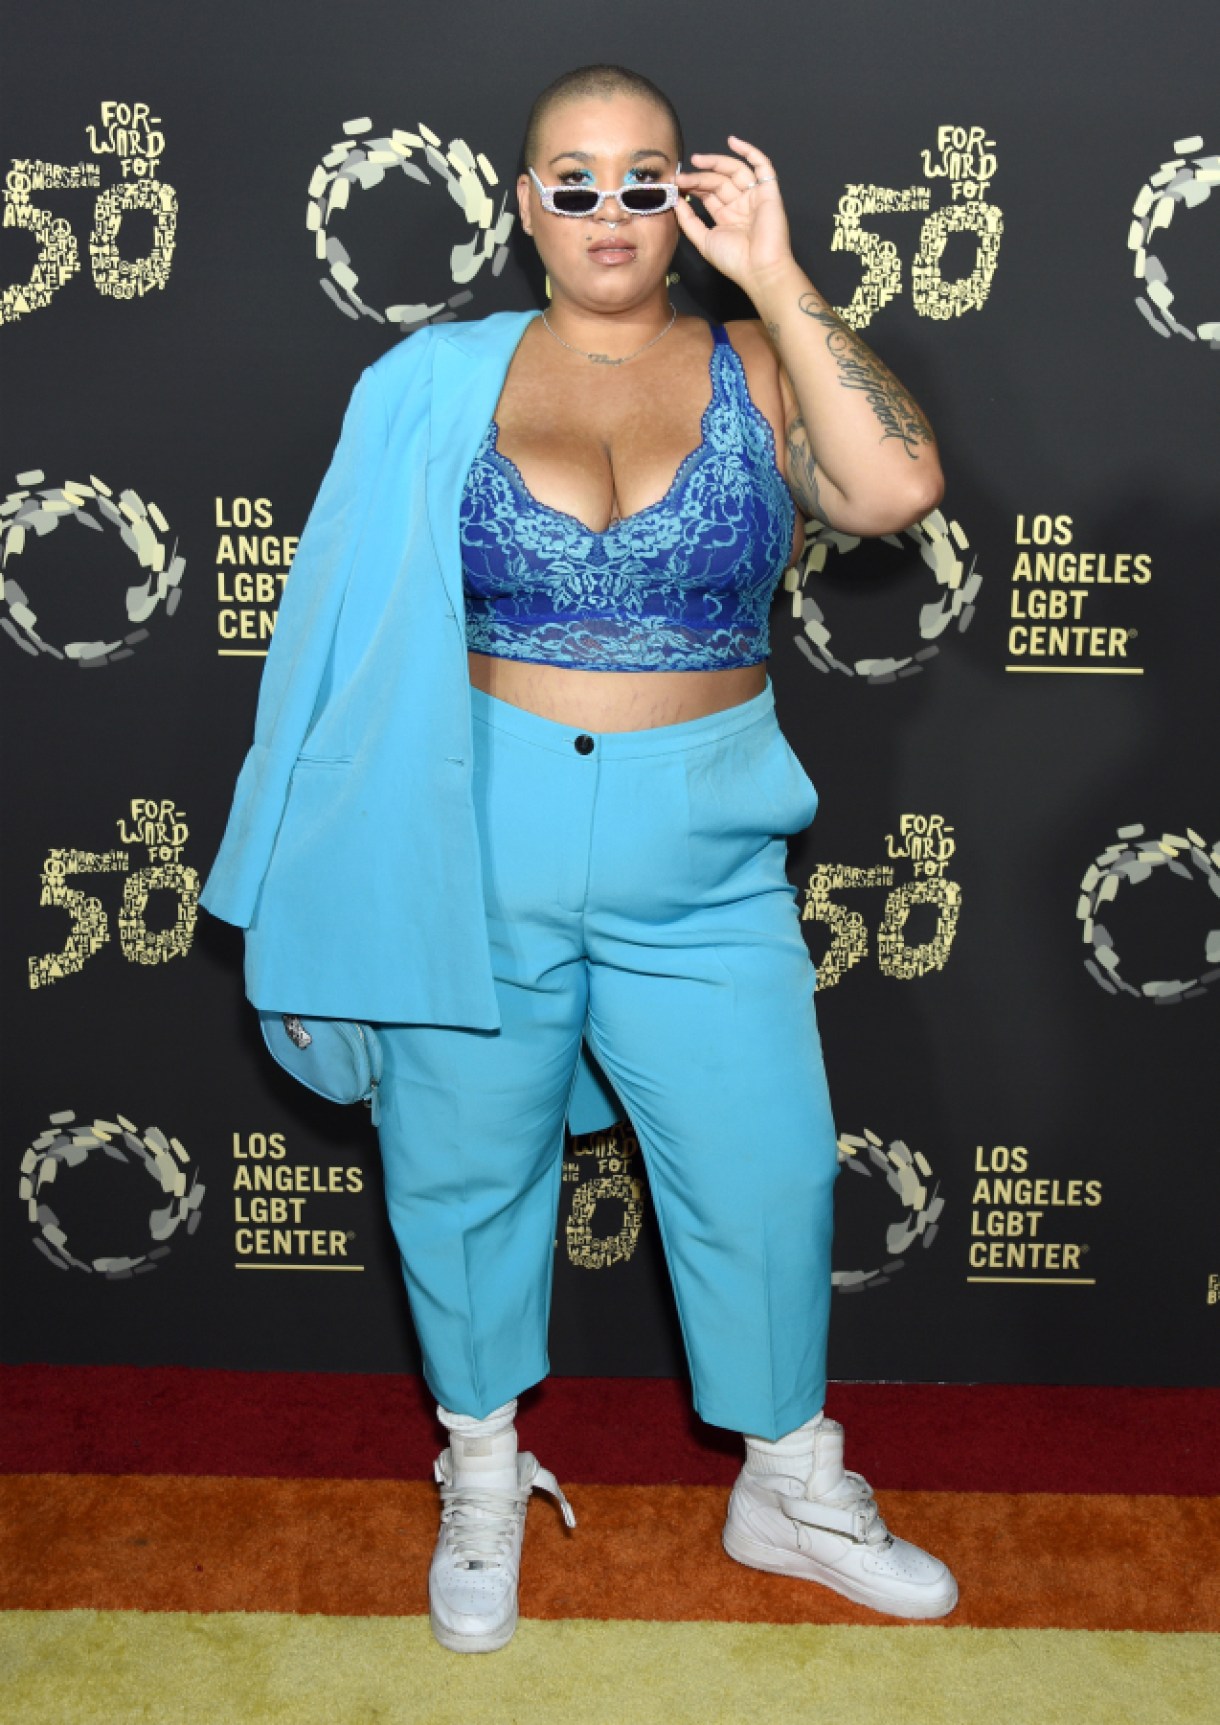 LOS ANGELES, CALIFORNIA - SEPTEMBER 21: Jazzmyne Jay attends Los Angeles LGBT Center Celebrates 50th Anniversary With "Hearts Of Gold" Concert & Multimedia Extravaganza at The Greek Theatre on September 21, 2019 in Los Angeles, California. (Photo by Gregg DeGuire/Getty Images for the Los Angeles LGBT Center)